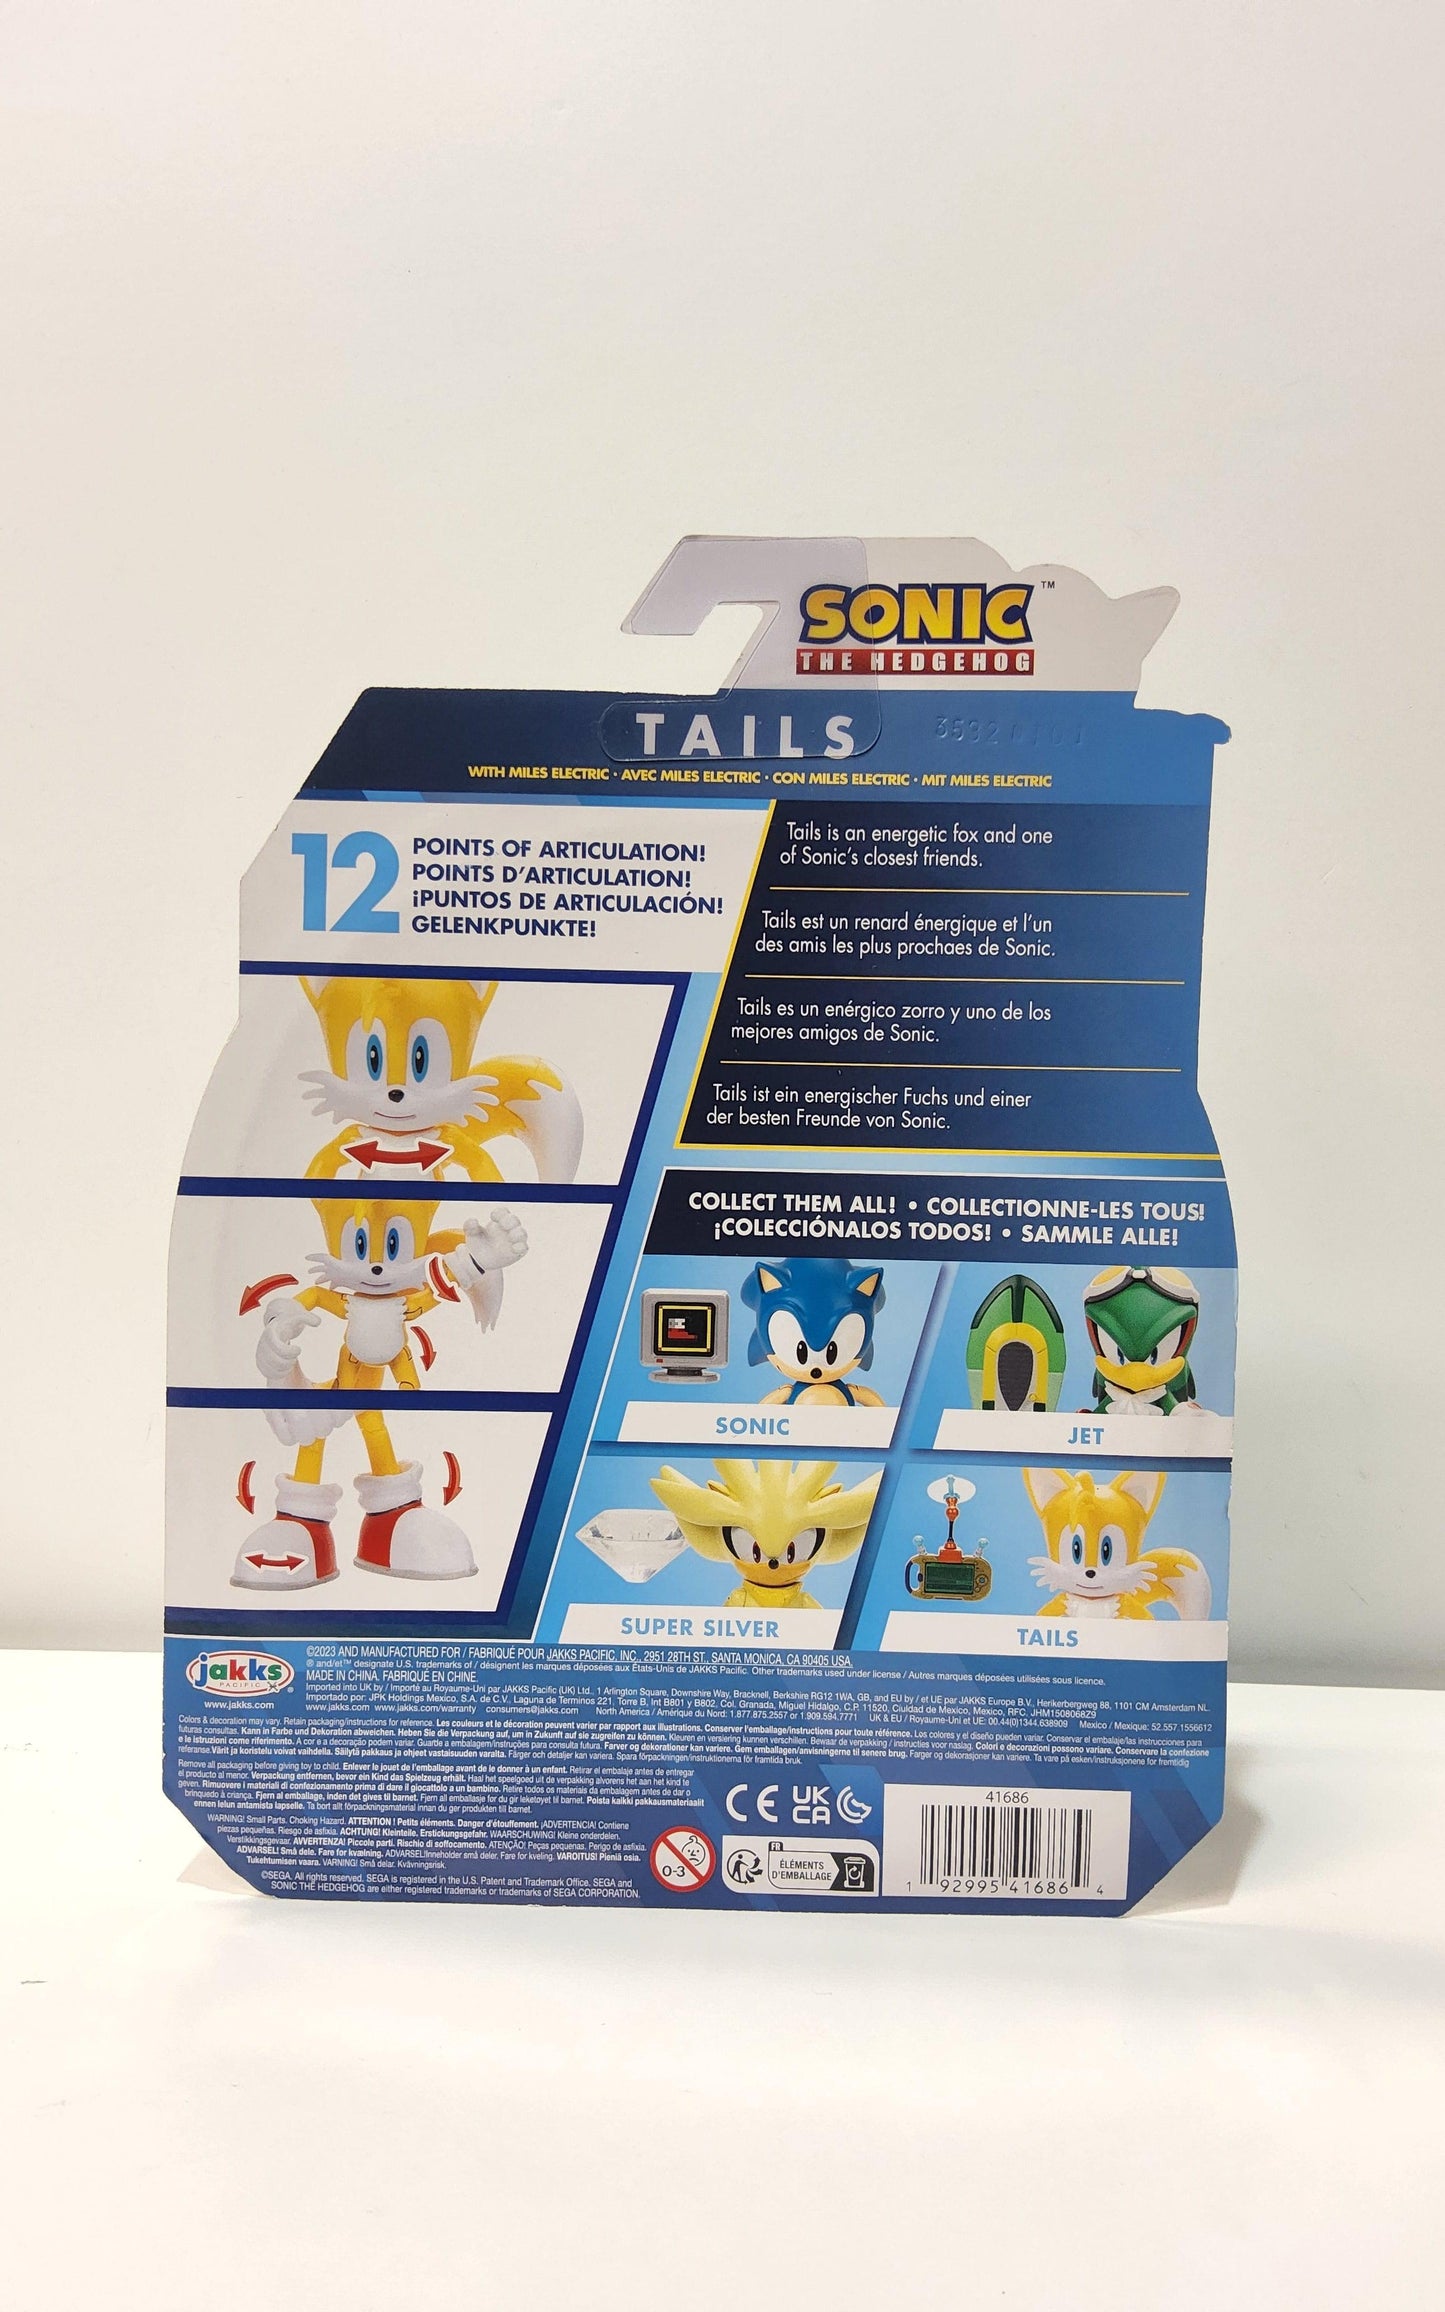 Sonic the Hedgehog Tails 4" With Miles Electric Device Action Figure - Logan's Toy Chest